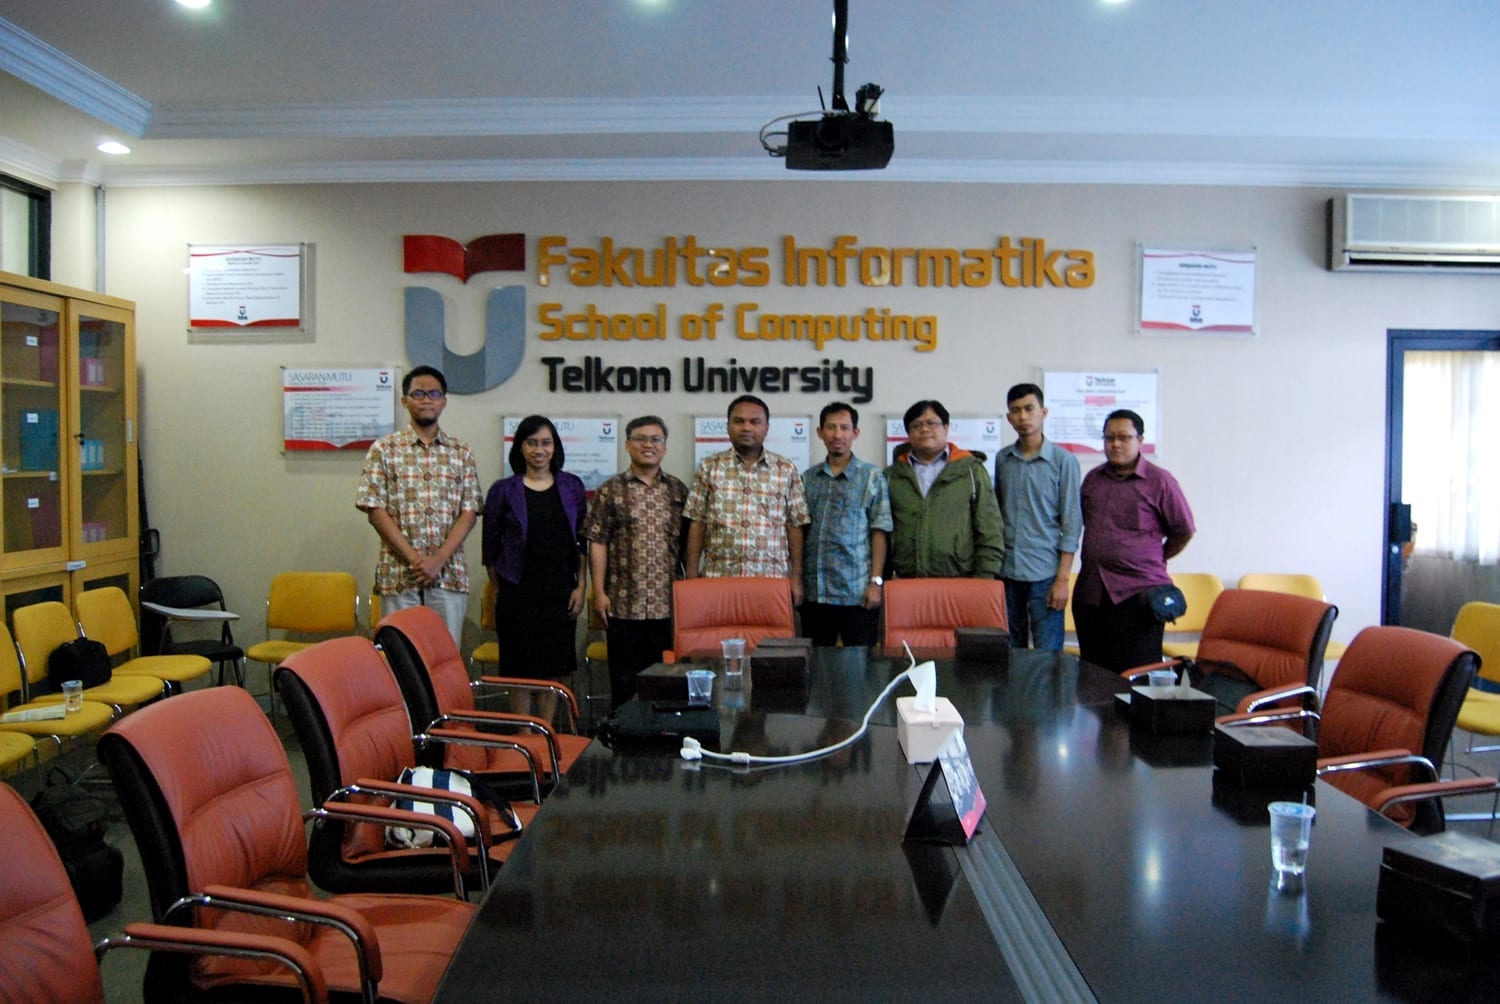 Gallery of Laboratory Management Visit from University of Muhammadiyah Sukabumi Faculty of Science and Technology